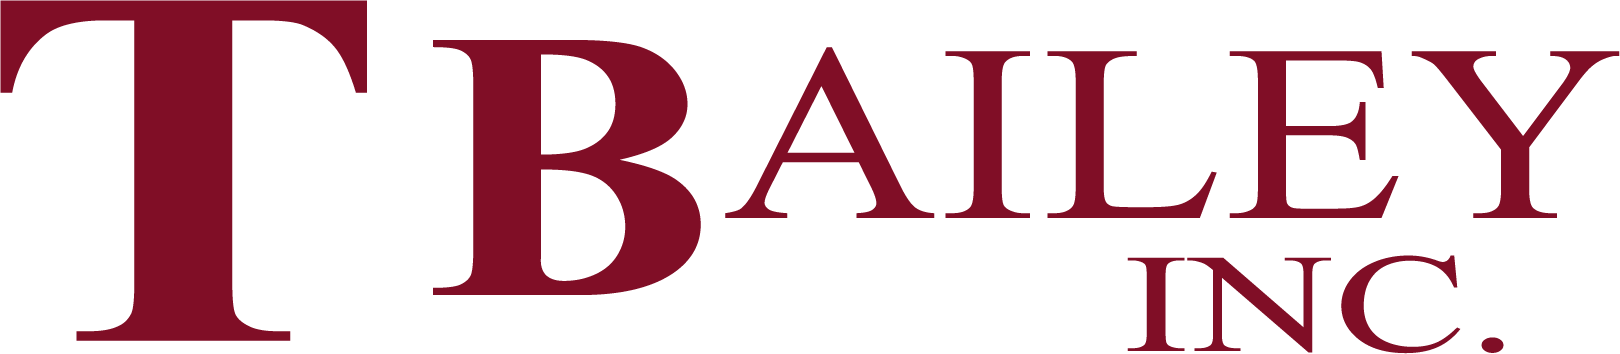 T-Bailey-Logo-1.png